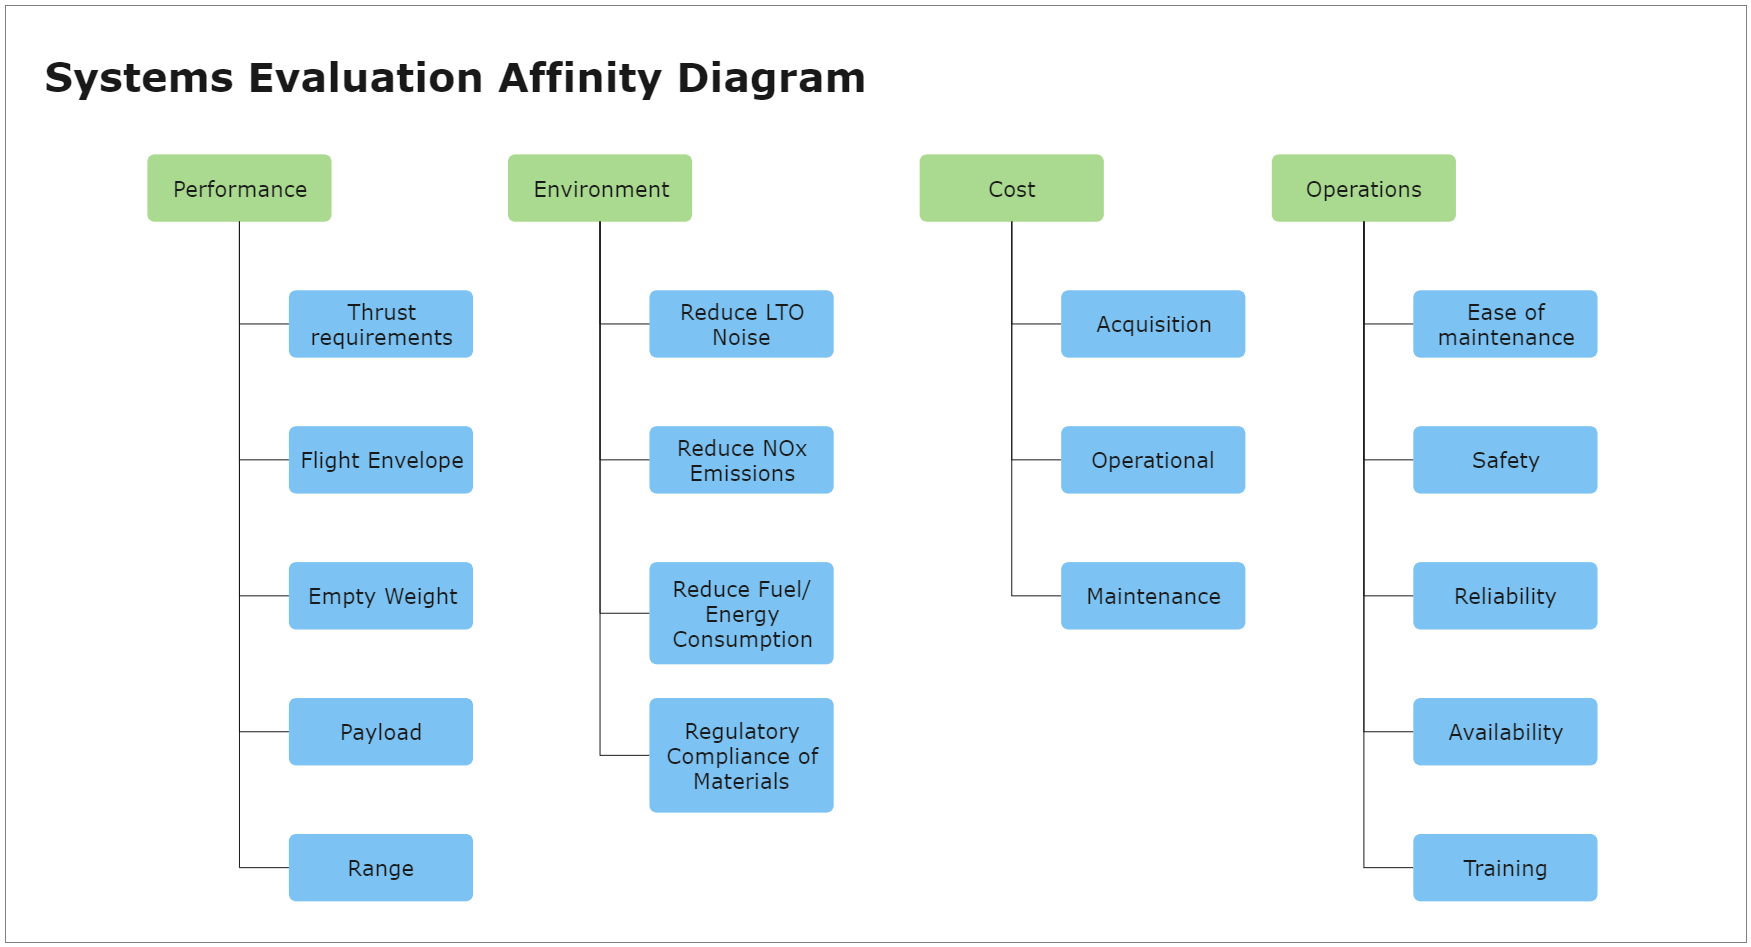 Systems Evaluation Affinity Diagram